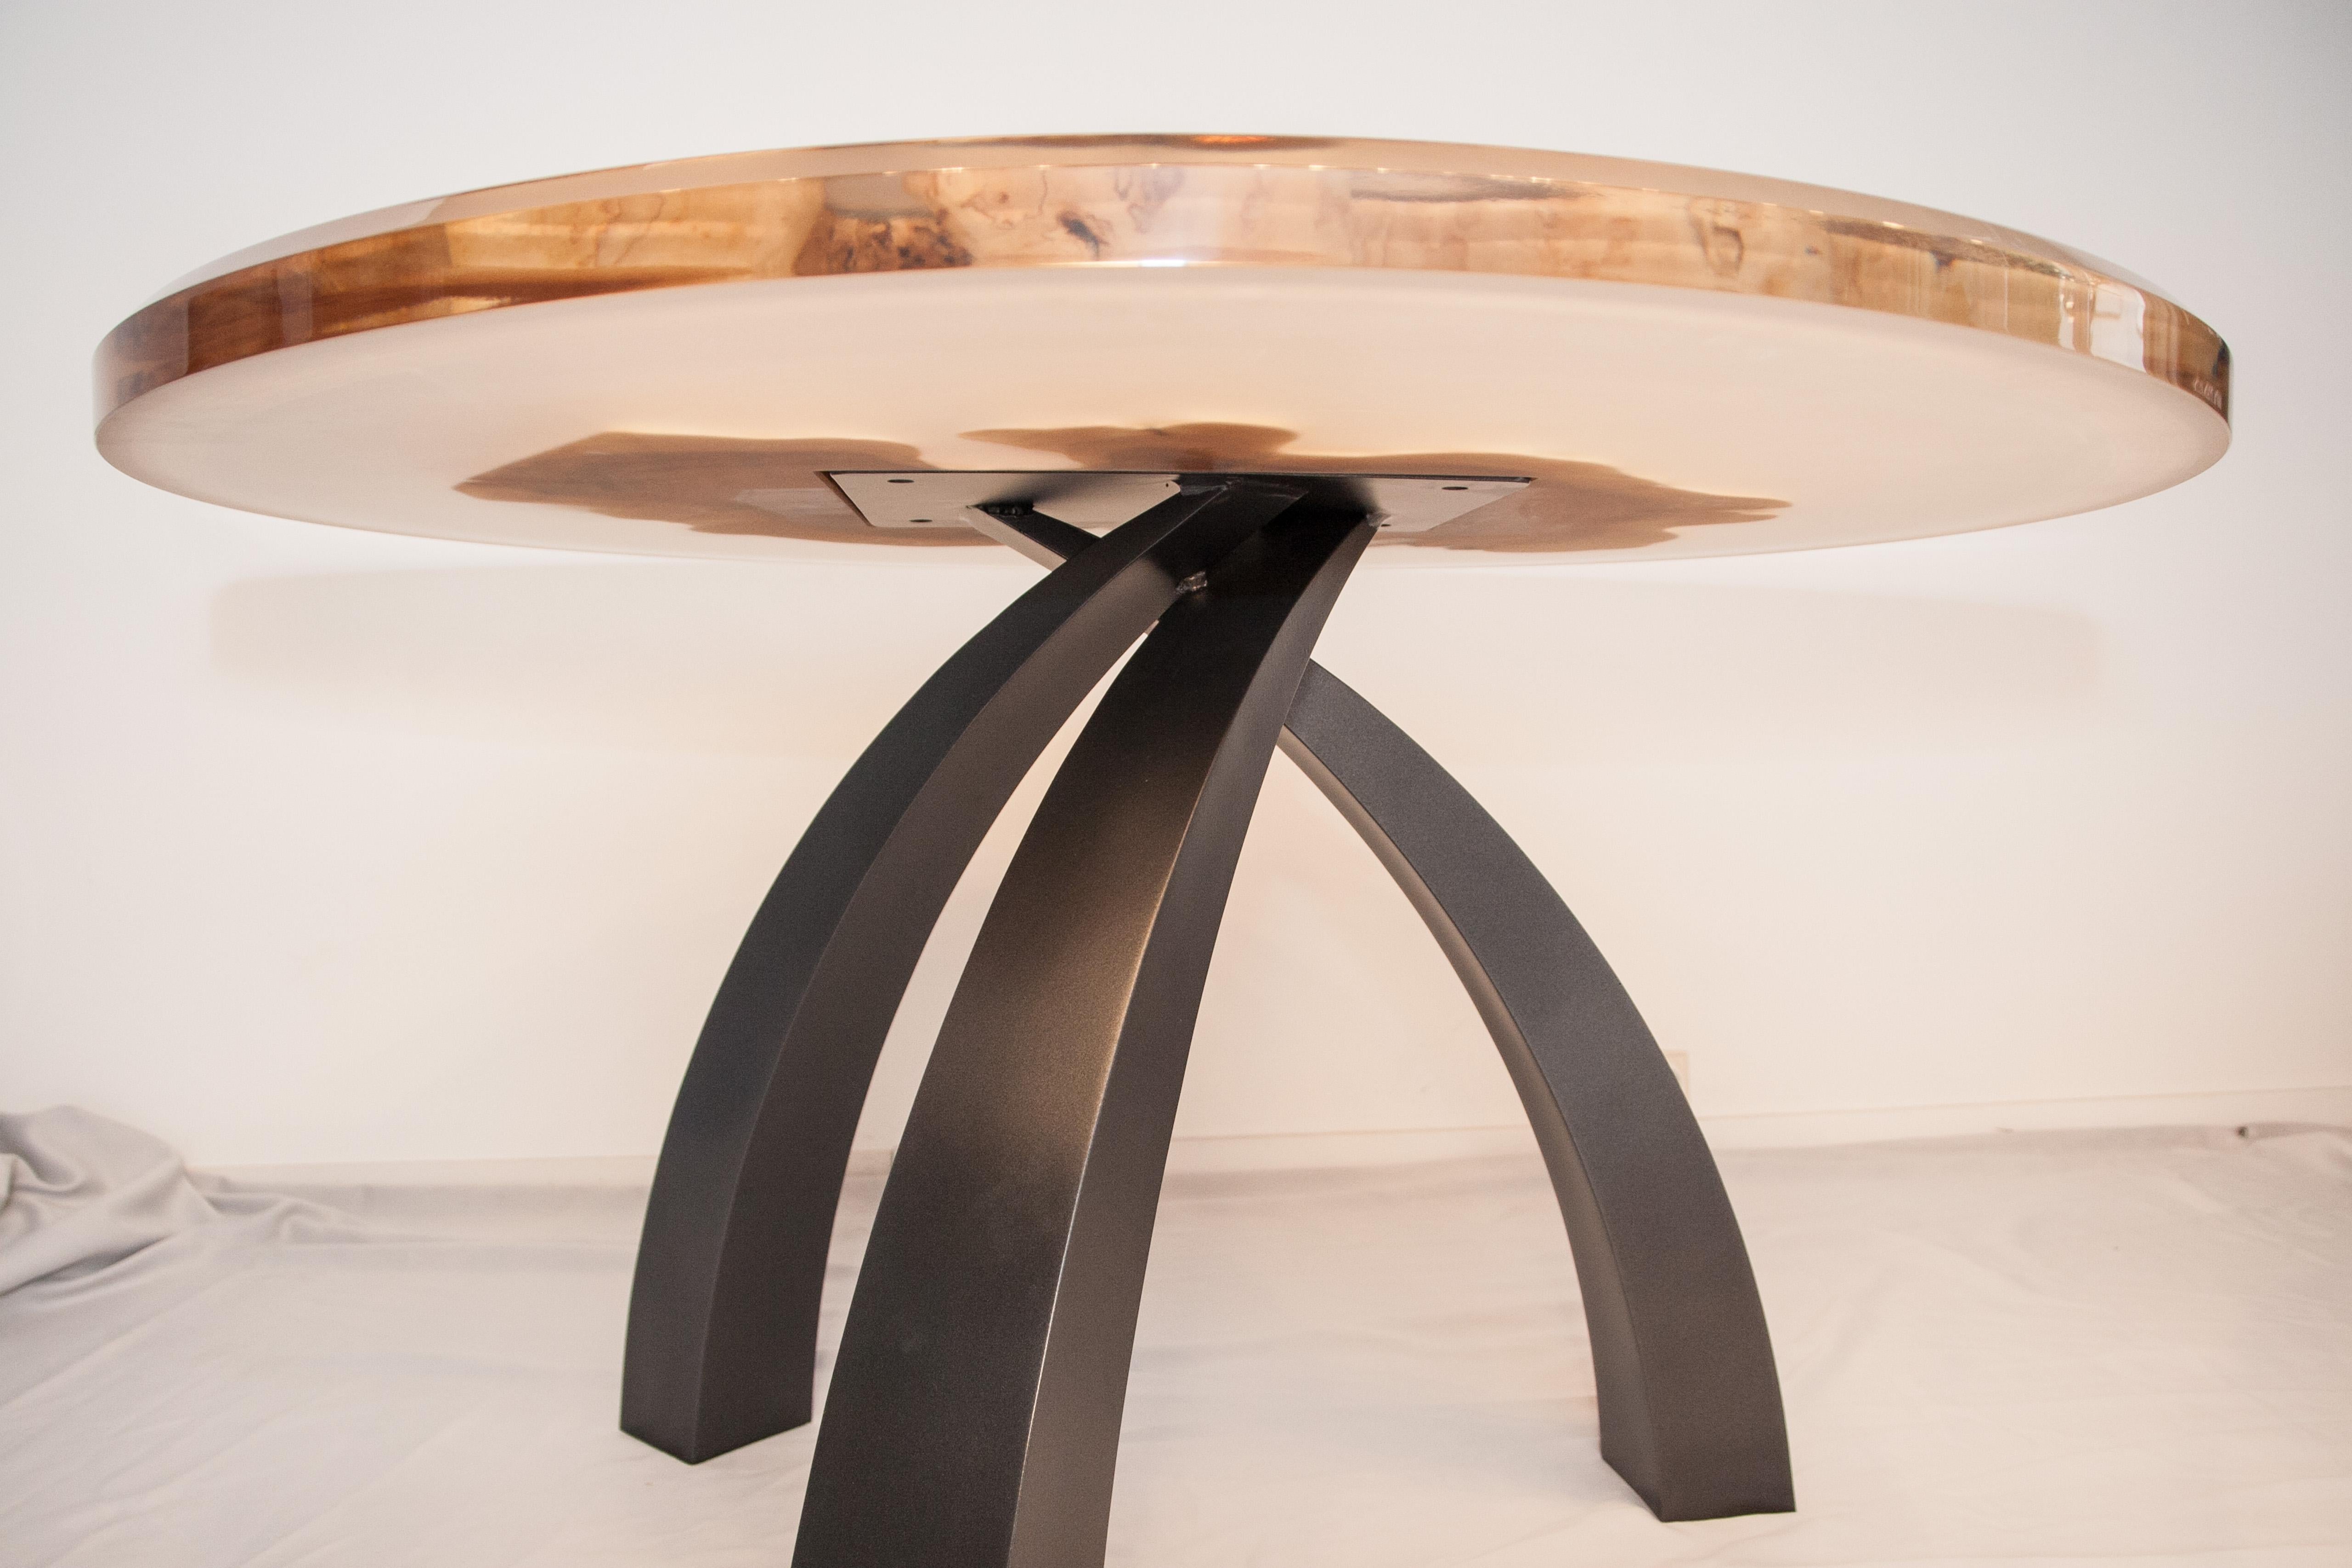 For this unique contemporary piece, the designer chose a magnificent slice of centuries-old olive tree trunk (estimated at 300 years), originating in Apulia, which he enhanced by embedding it into a translucent epoxy resin. Then, he added his